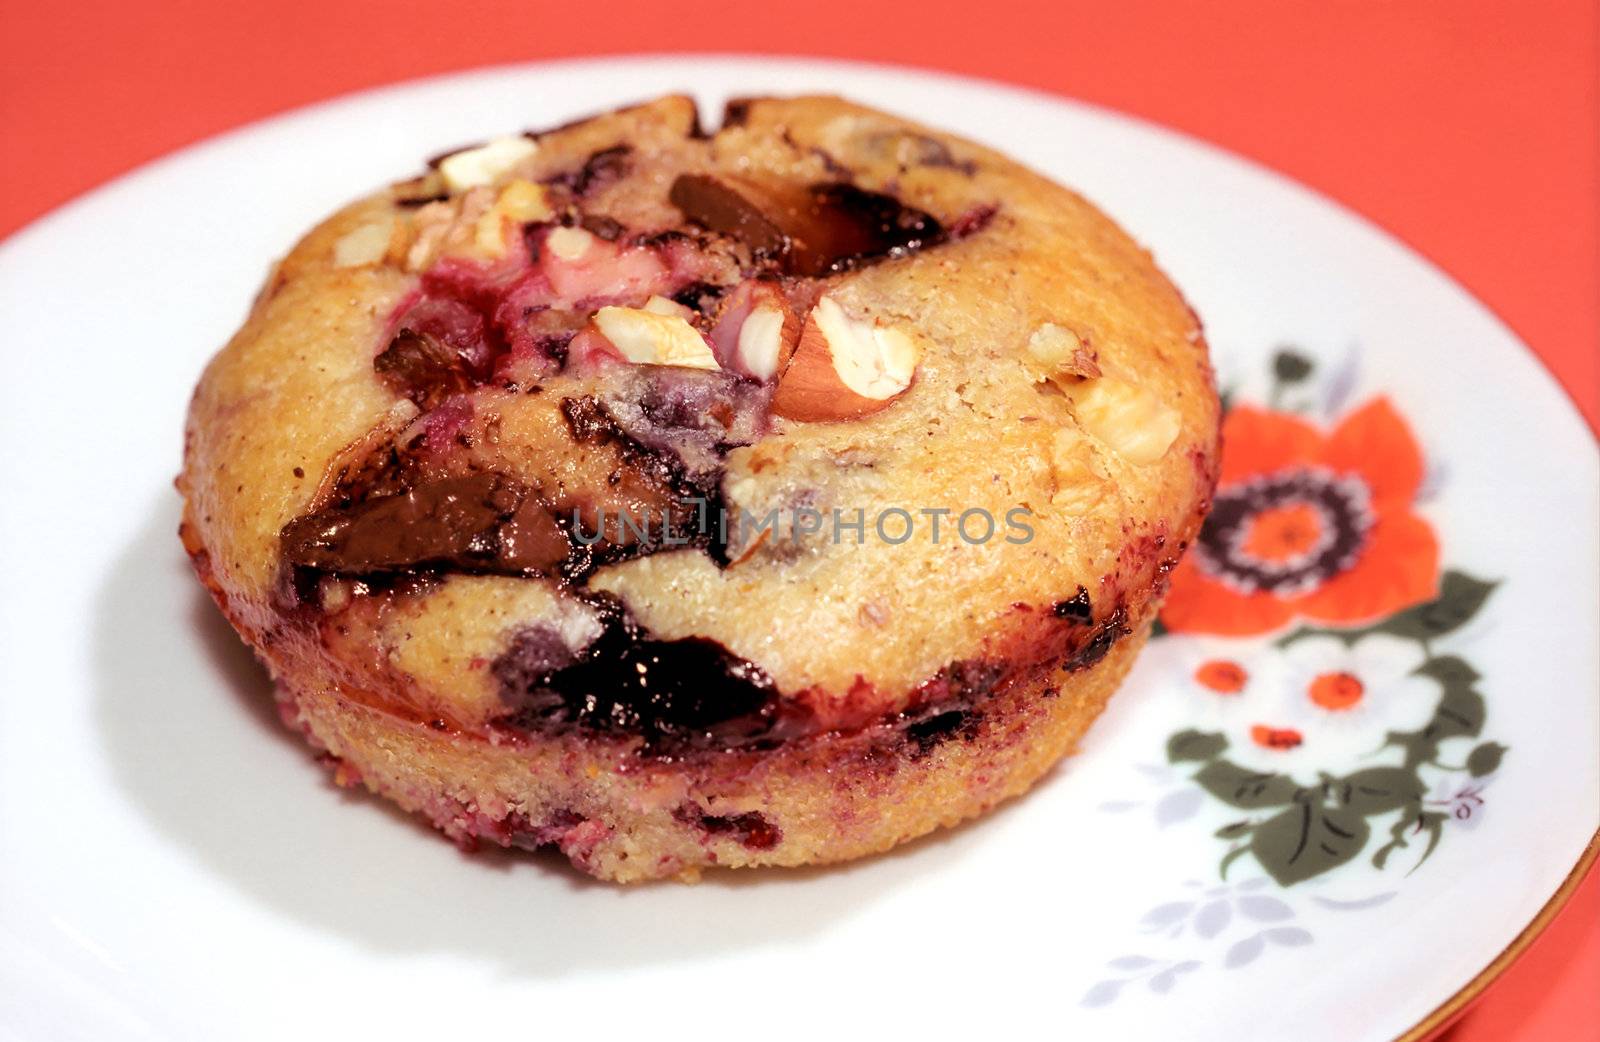 Muffin cake on the dessert plate with red background